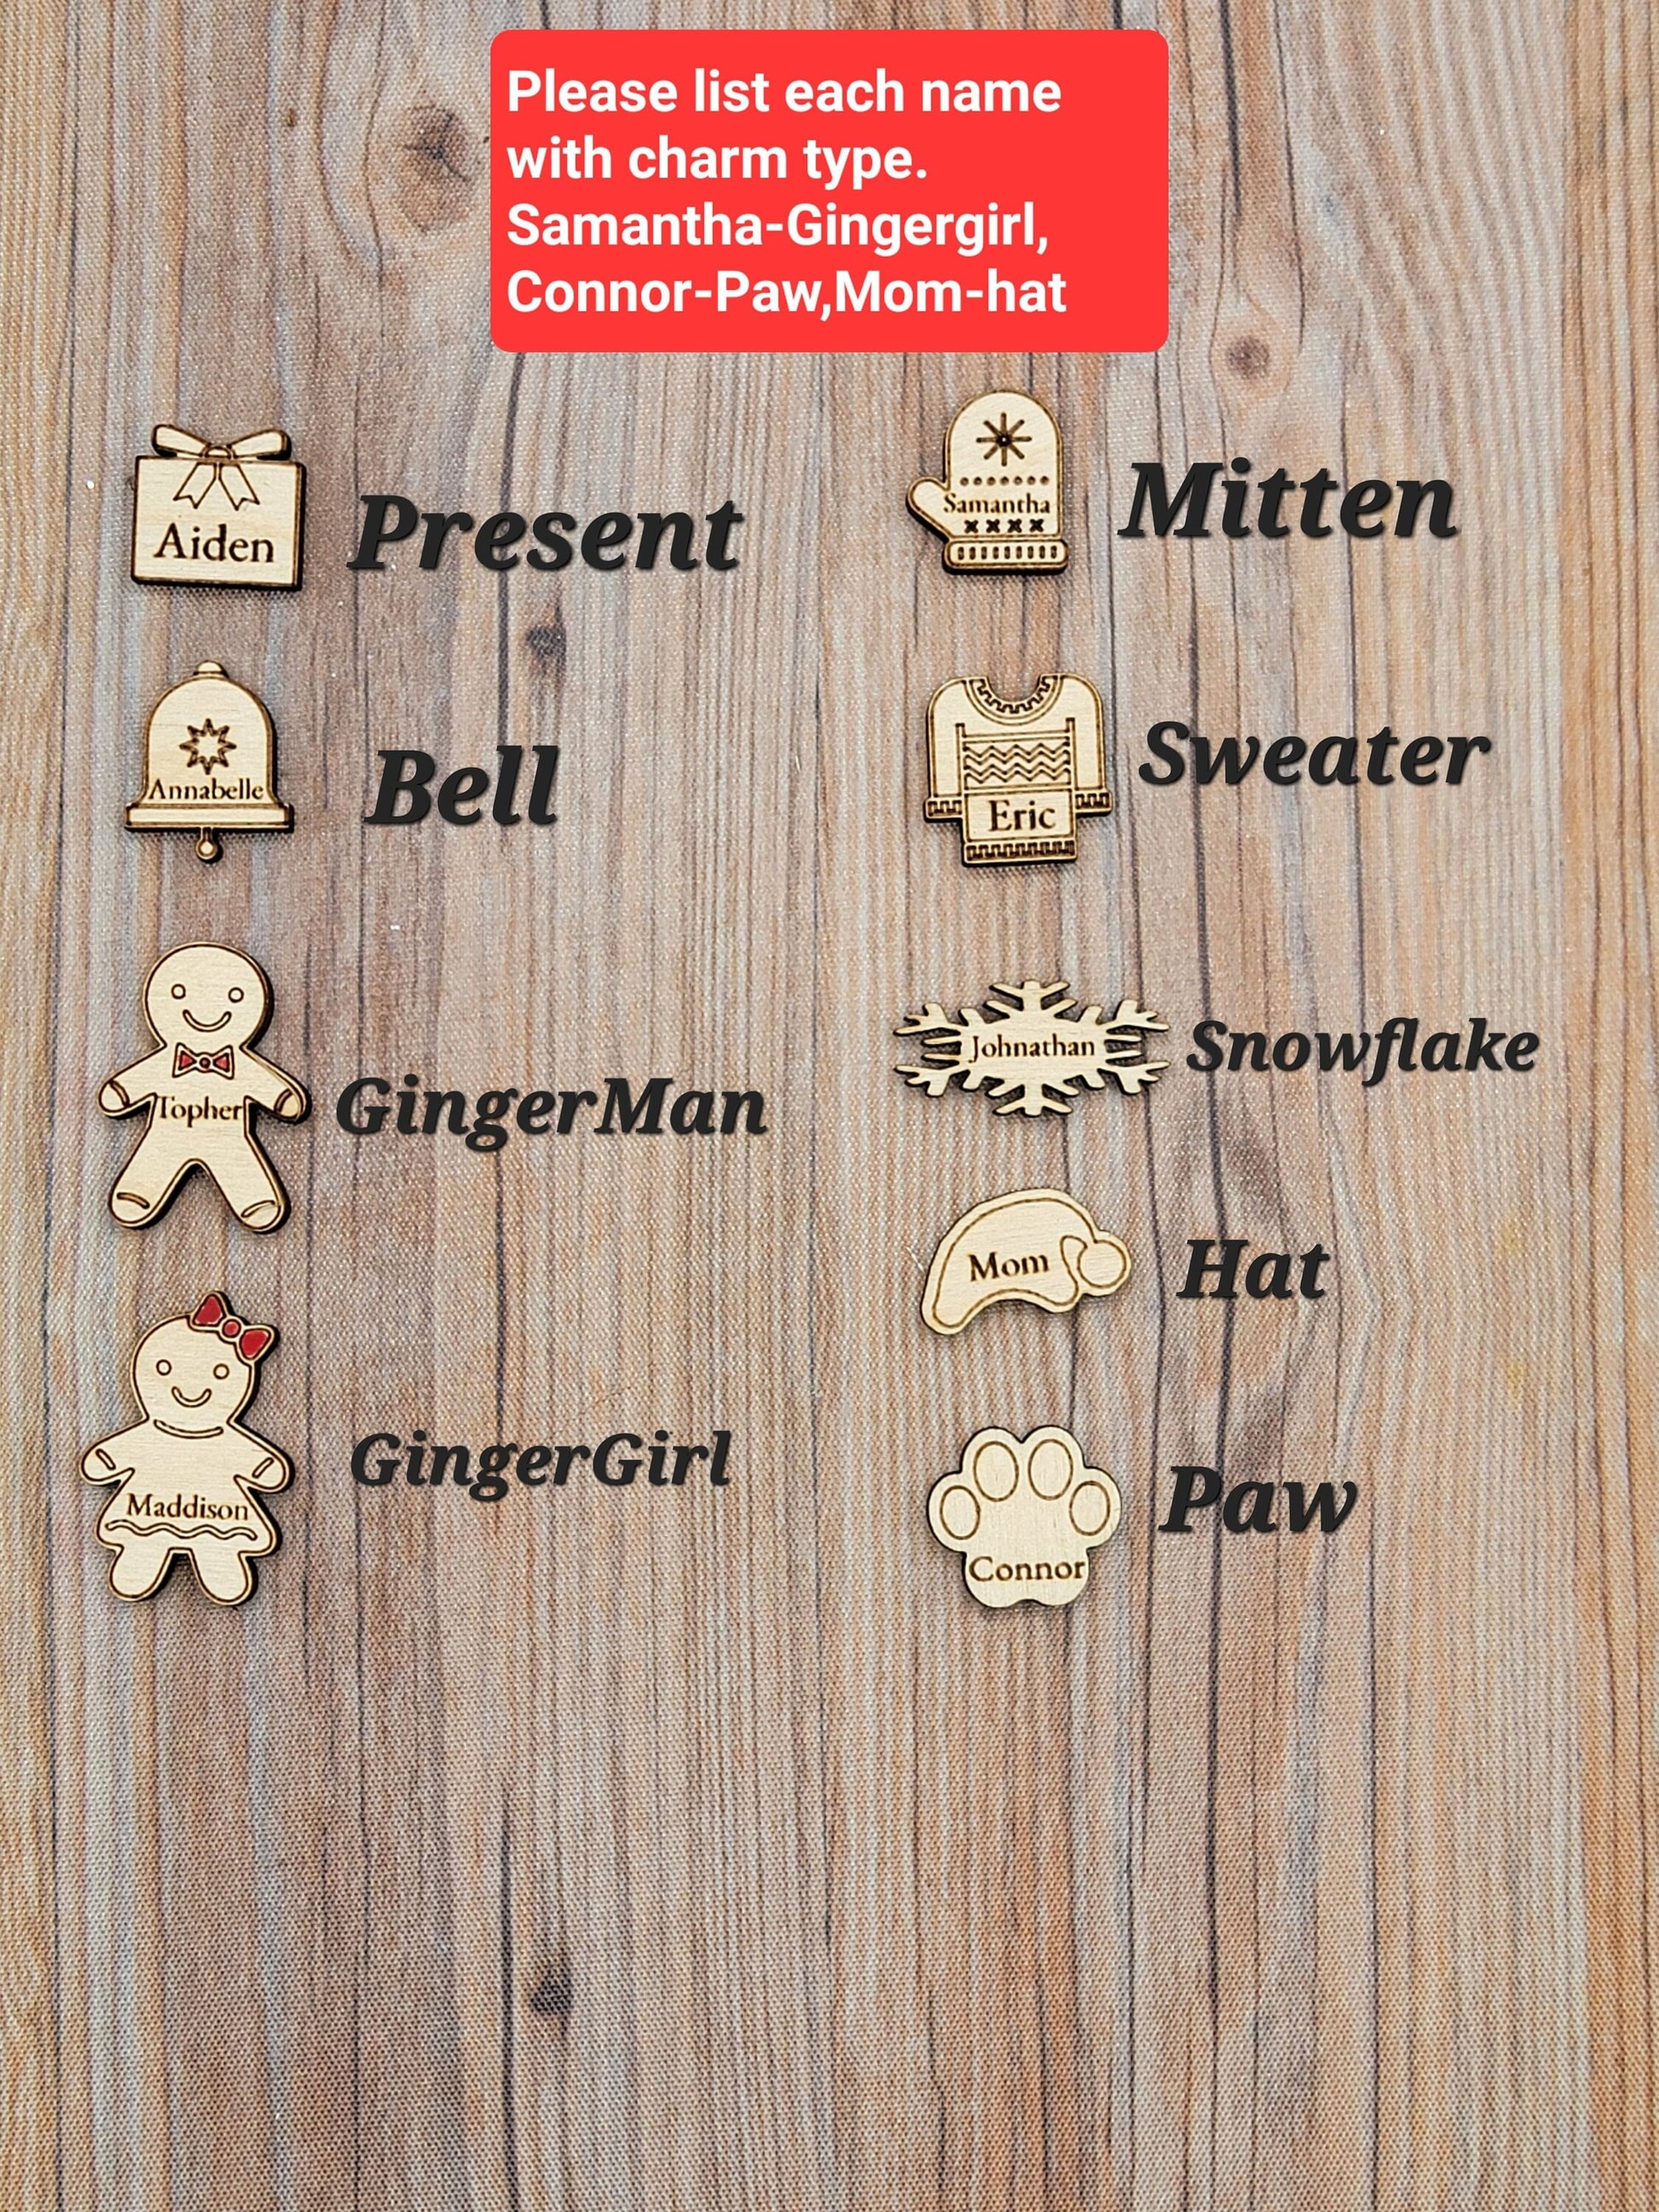 Personalized Gingerbread , Snowflake, Bell, Present Christmas Charms for Shaker Ornaments. Tier Tray Decor. Message for Special Request